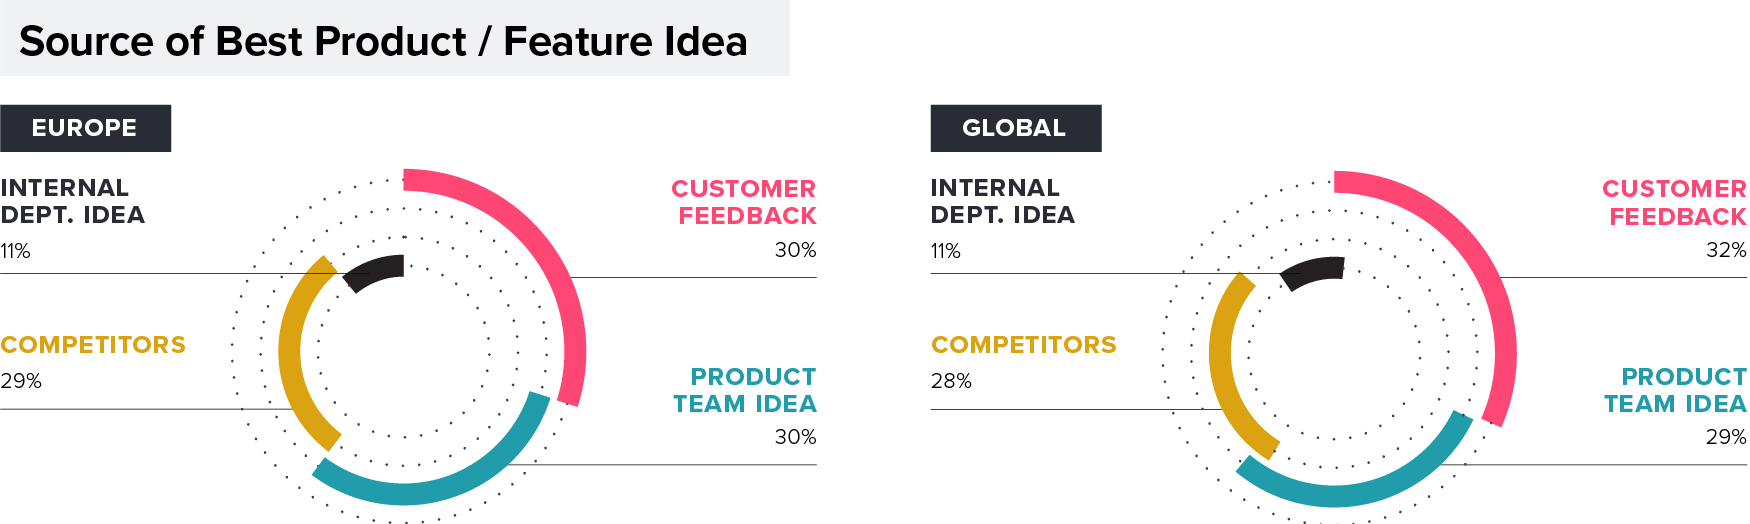 Product Managment Ideas Features: Europe vs. Global